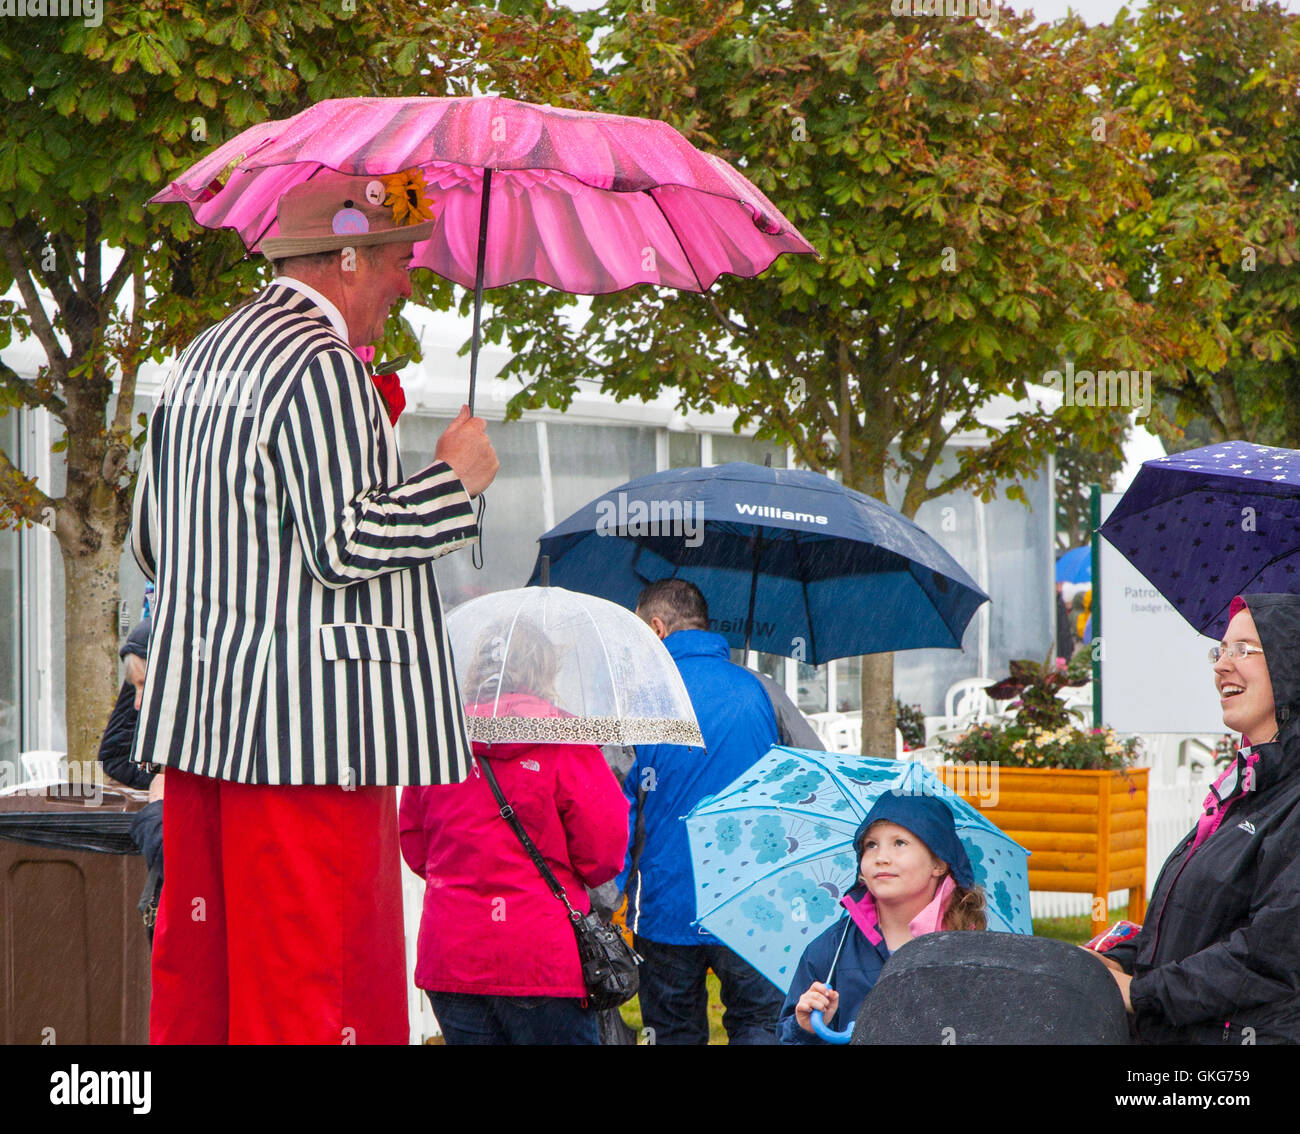 Southport Flower Show, Merseyside, UK. 17th Aug 2016:  Stiltwalker and children's clown Professor Crump entertains the children at the largest independent flower show in England, which is expecting thousands of visitors over the four day event.  Credit:  MediaWorld Images/Alamy Live News Stock Photo